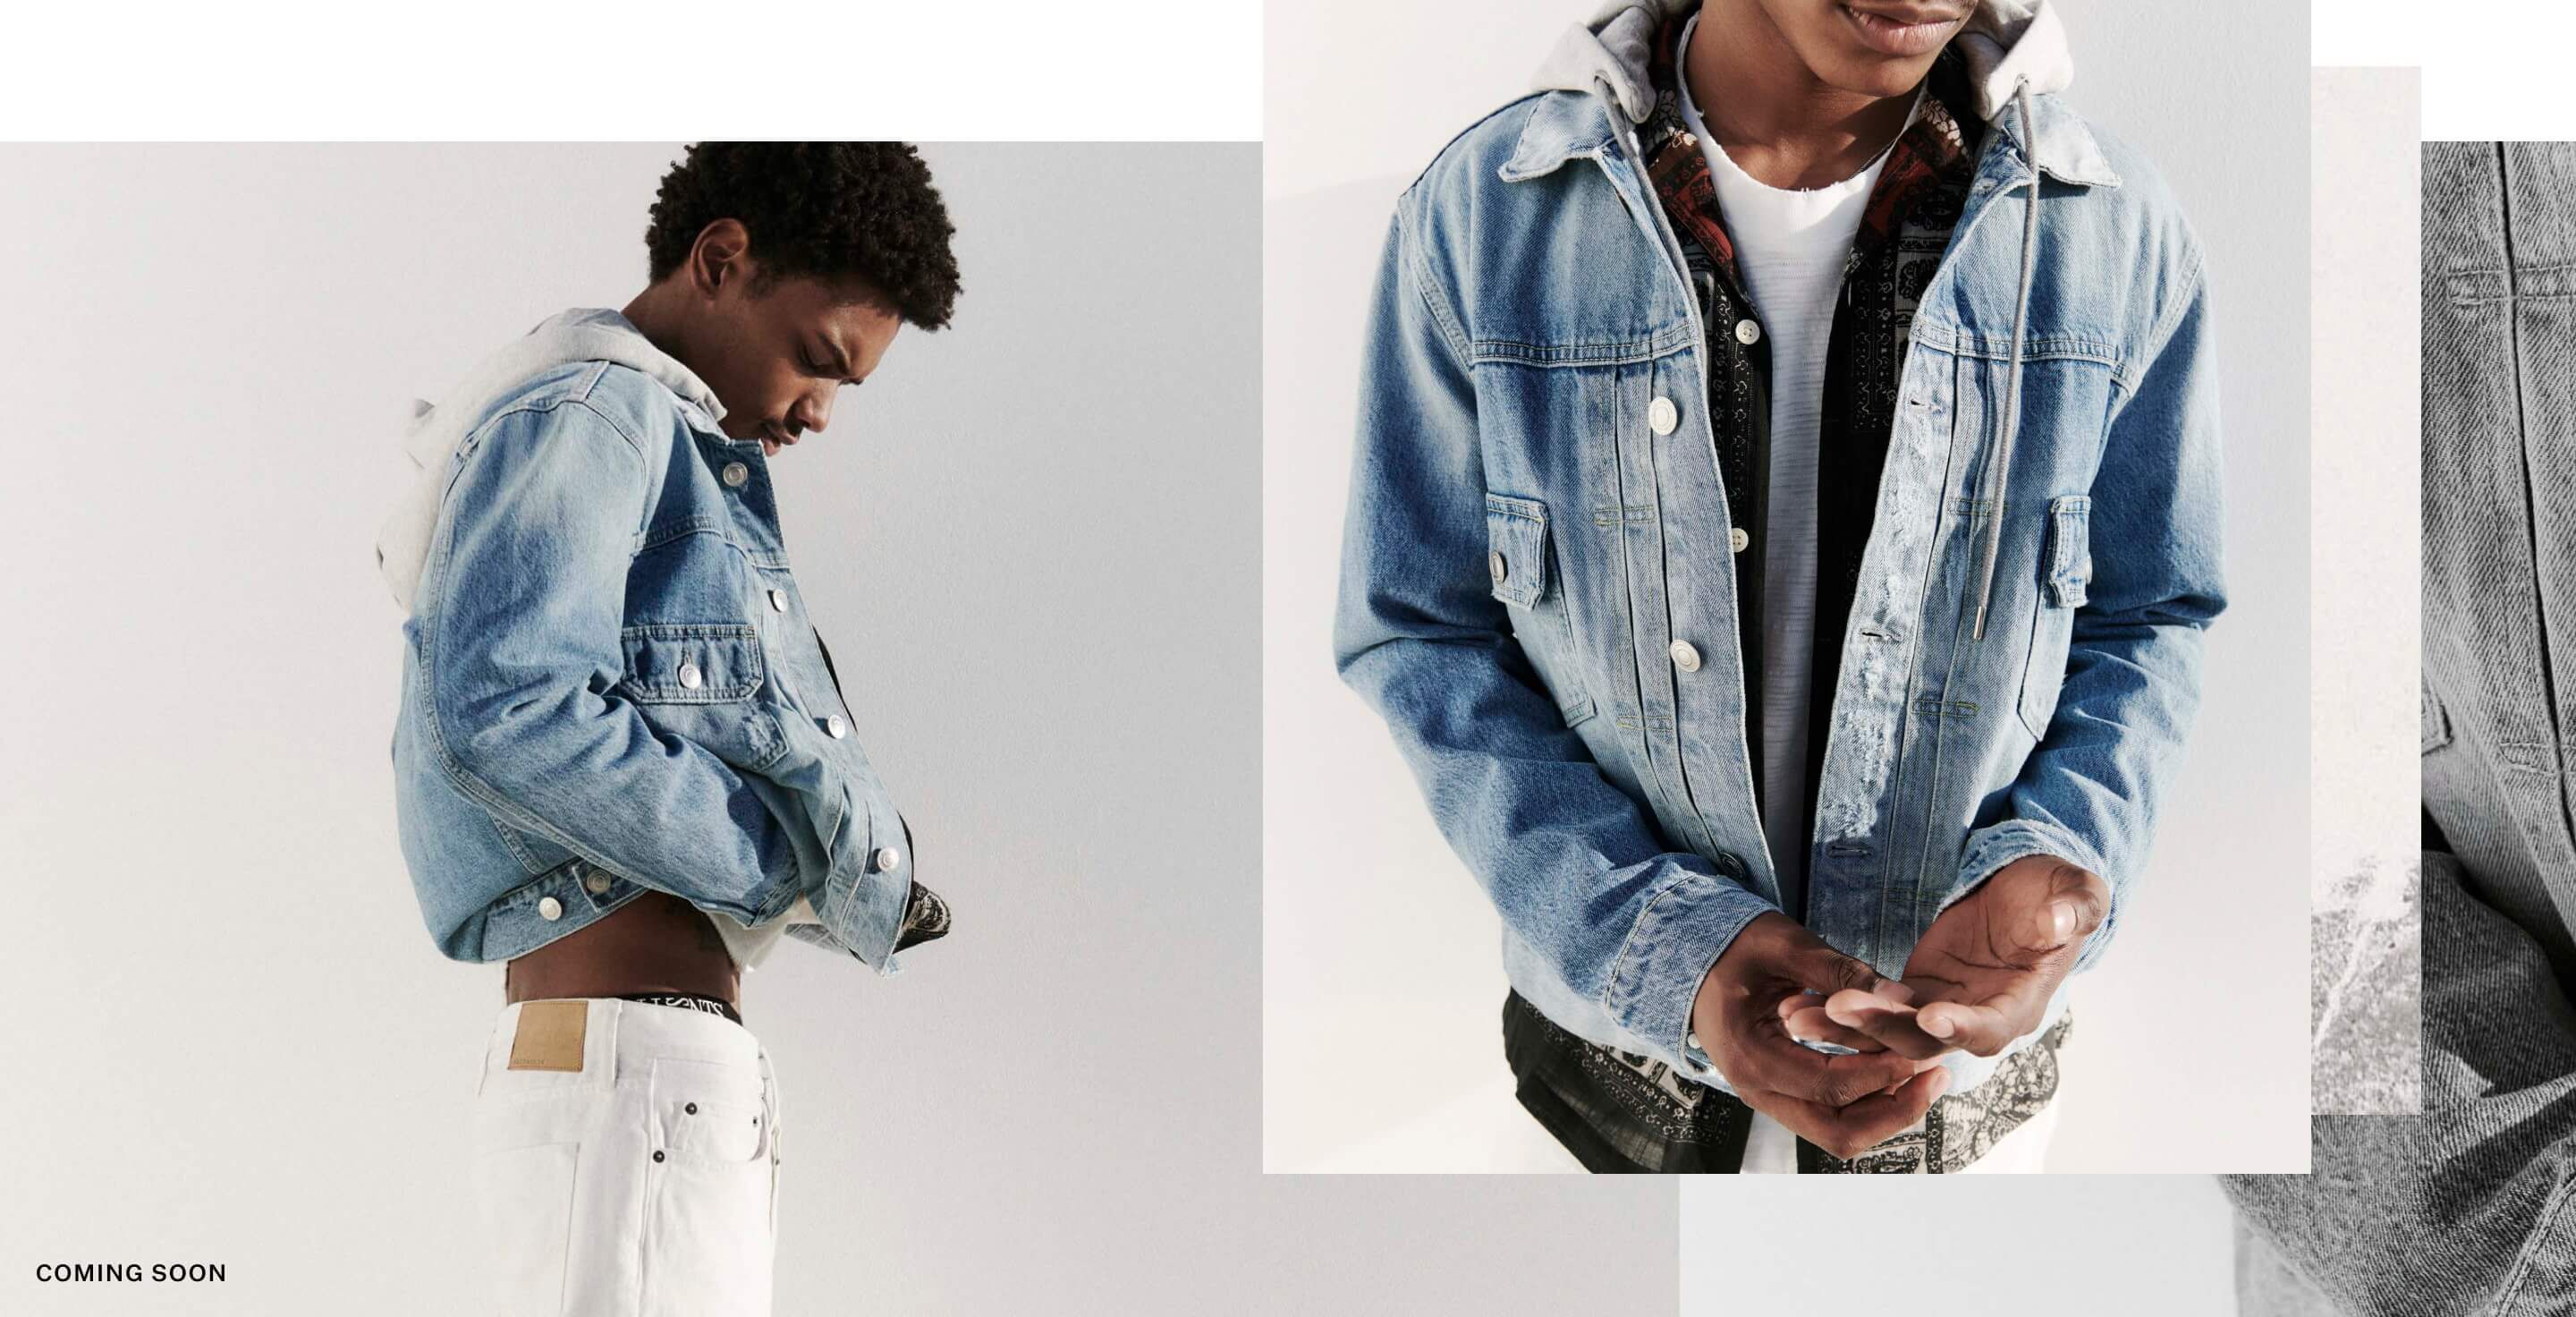 A collage of three photographs showing a model wearing a hooded light blue denim jacket over an open printed shirt and white jeans standing in front of a beige wall